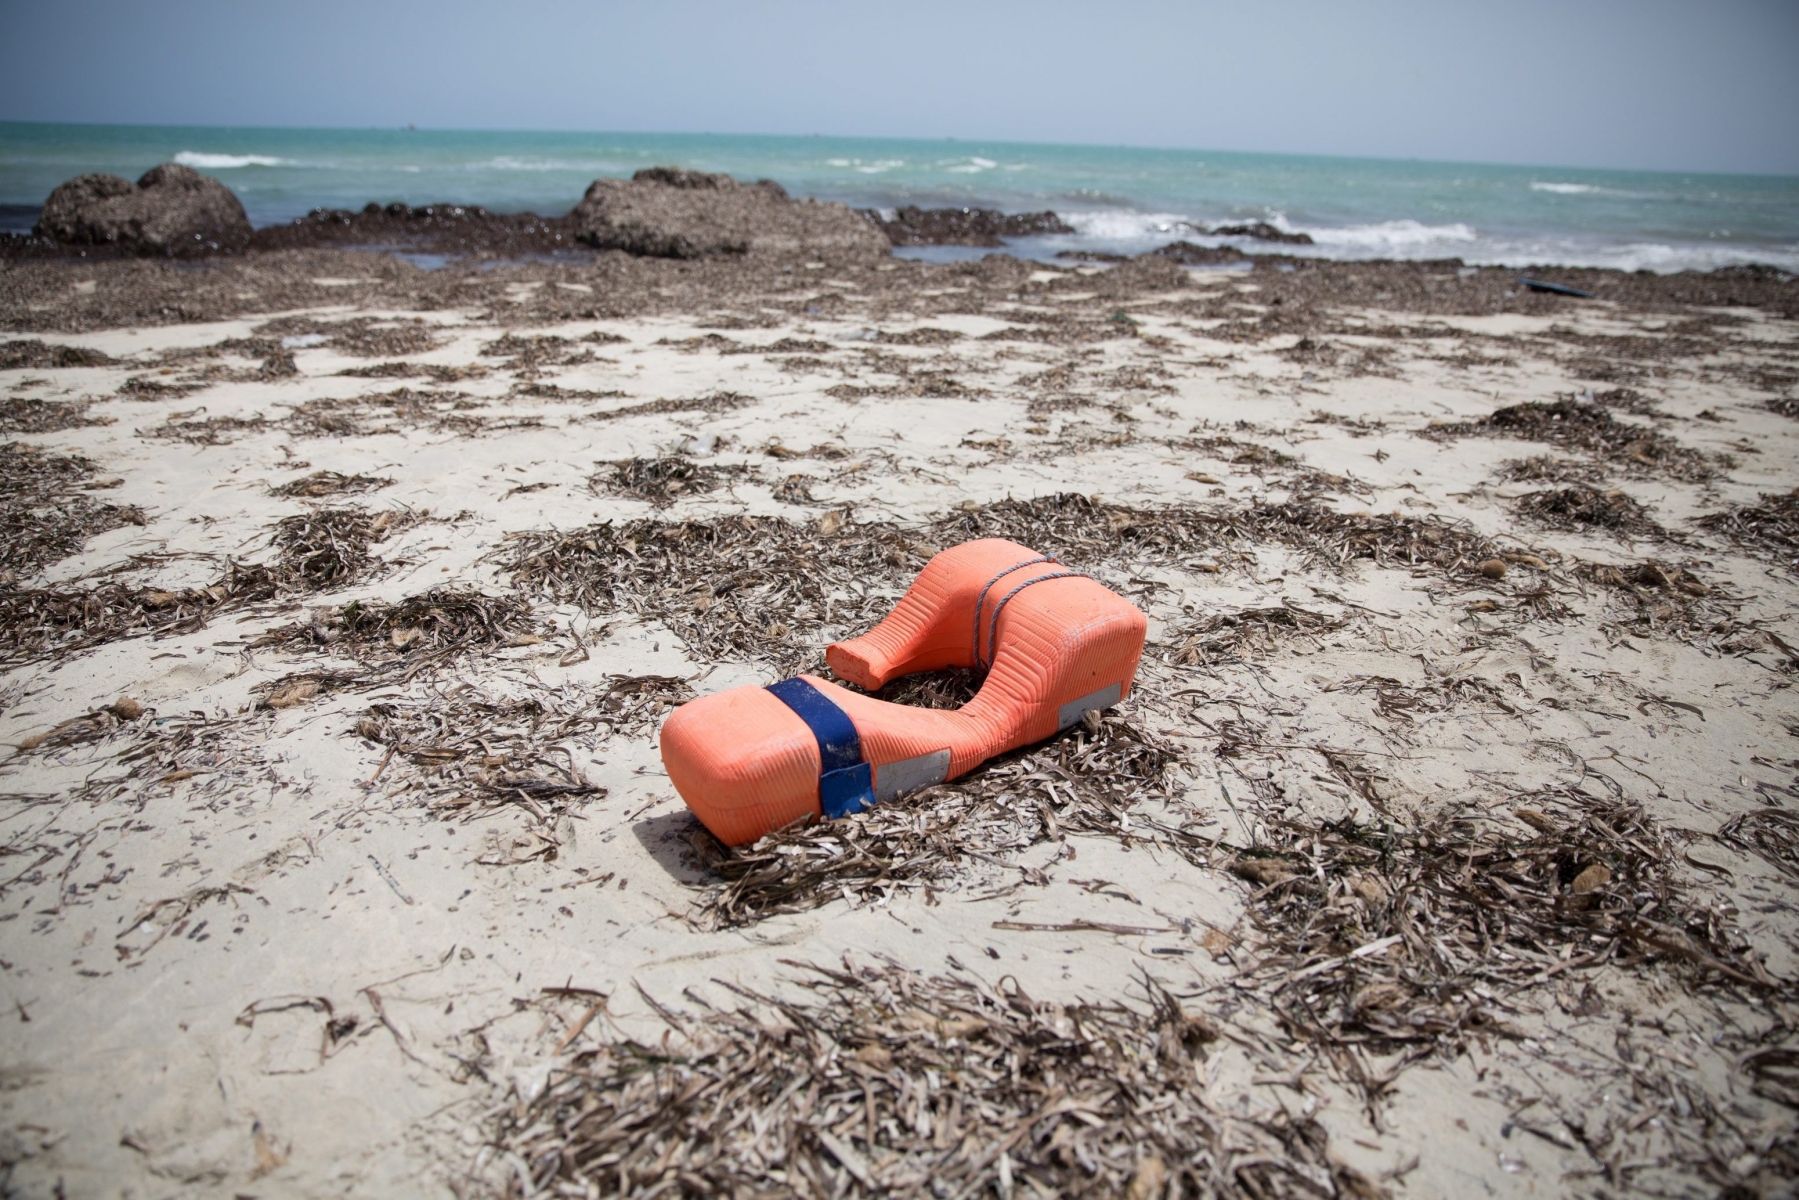 epa05343251 A buoyancy aid lies on a beach where bodies of migrants washed up, in Zuwarah, west of Tripoli, Libya, 02 June 2016. According to media reports citing Red Crescent officials, at least 85 bodies have washed up onto Libyan beaches this week.  EPA/MOHAME BEN KHALIFA LIBYA REFUGEES MIGRATION